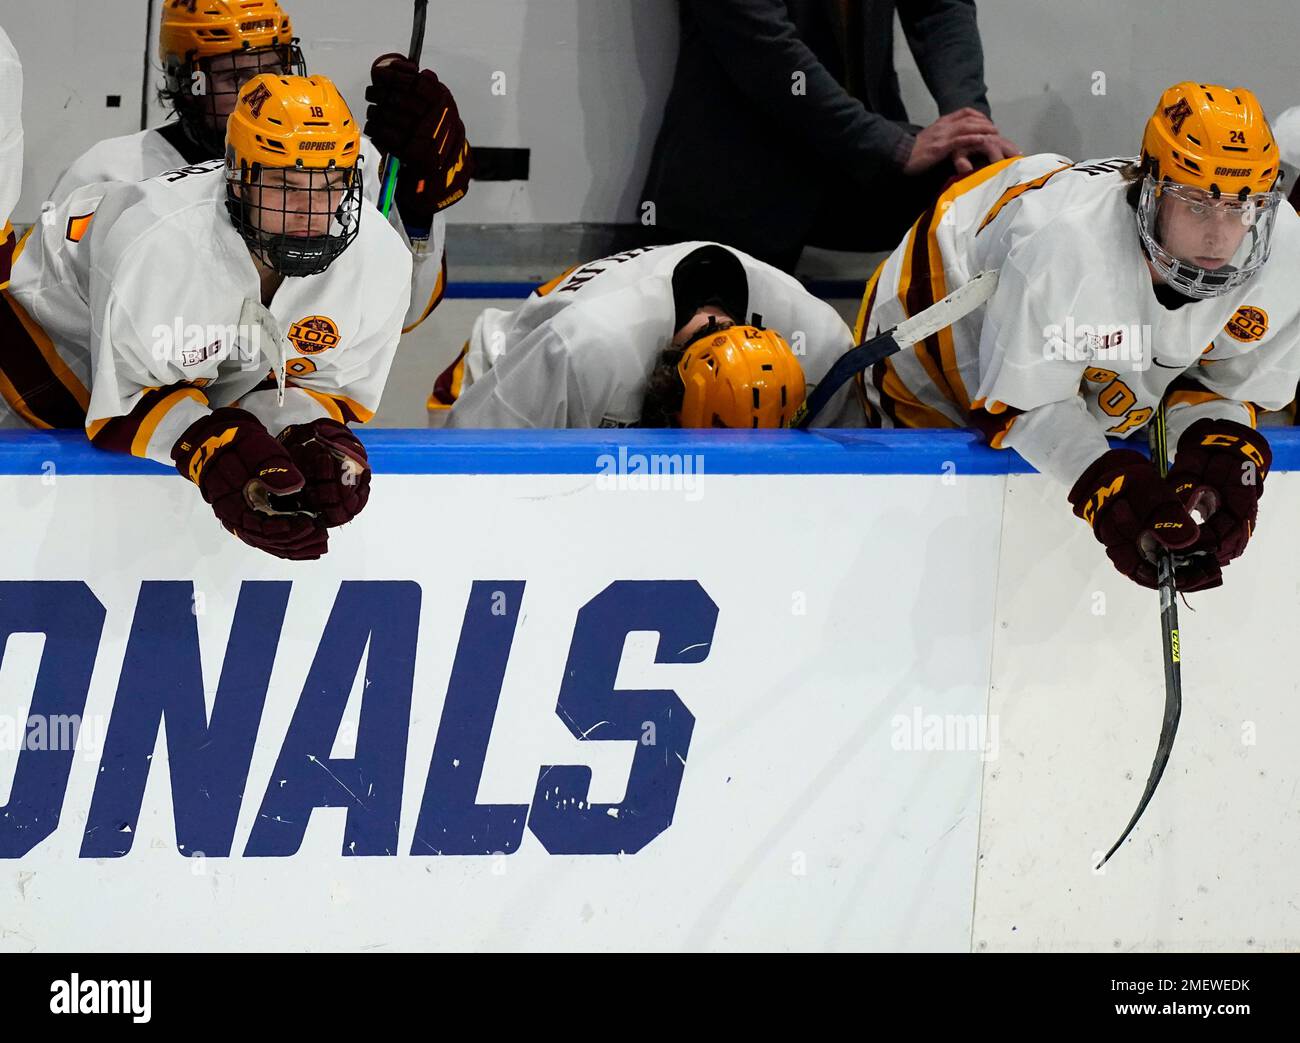 After a trying rookie season, Gophers forward Mason Nevers' game is taking  off